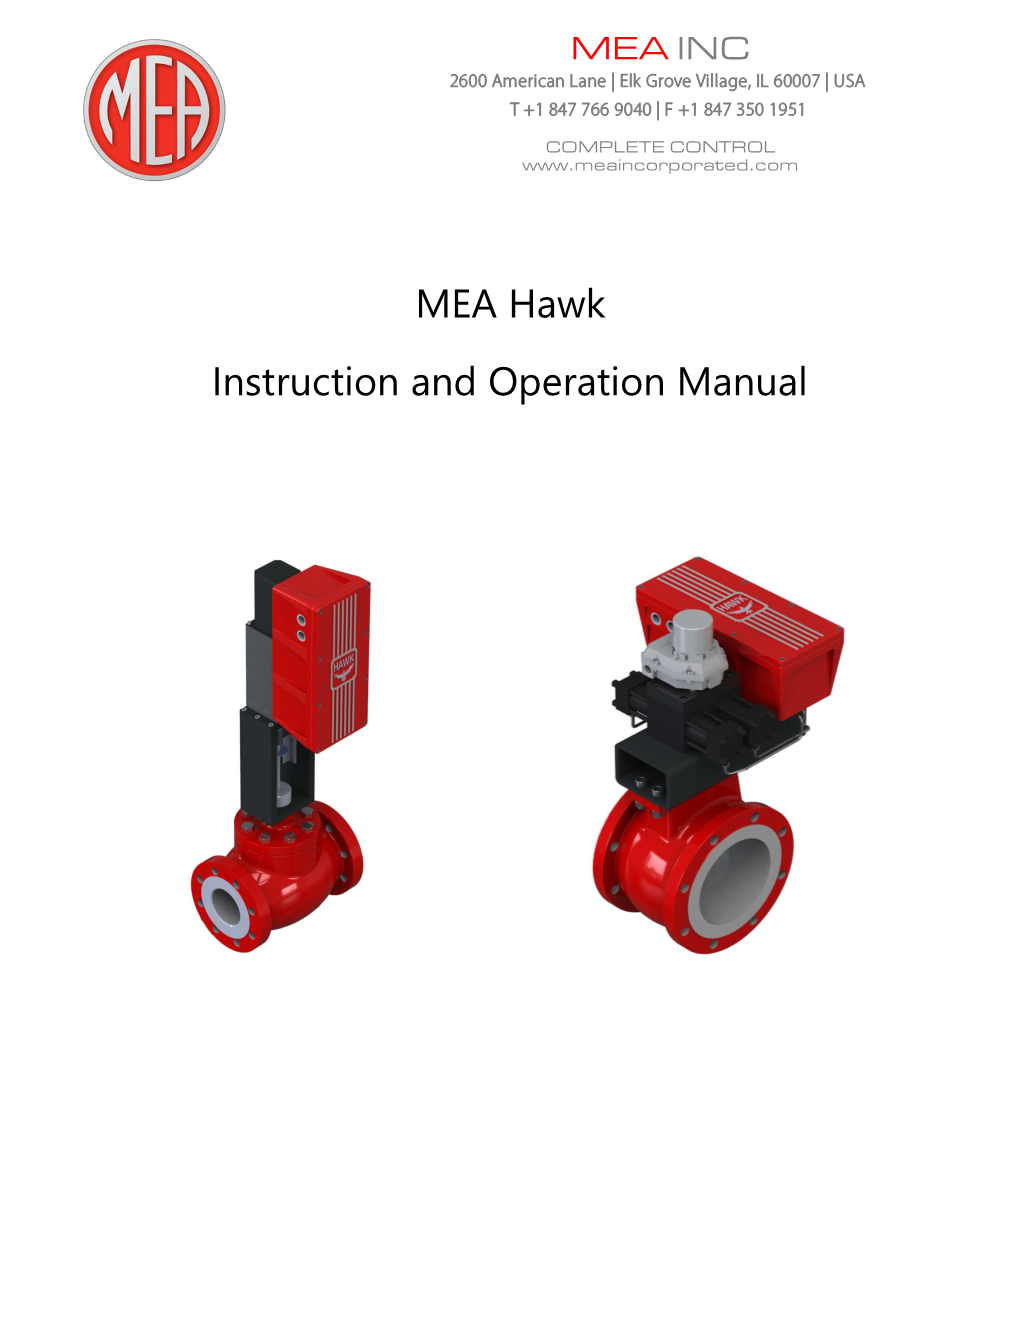 MEA Hawk Instruction and Operation Manual